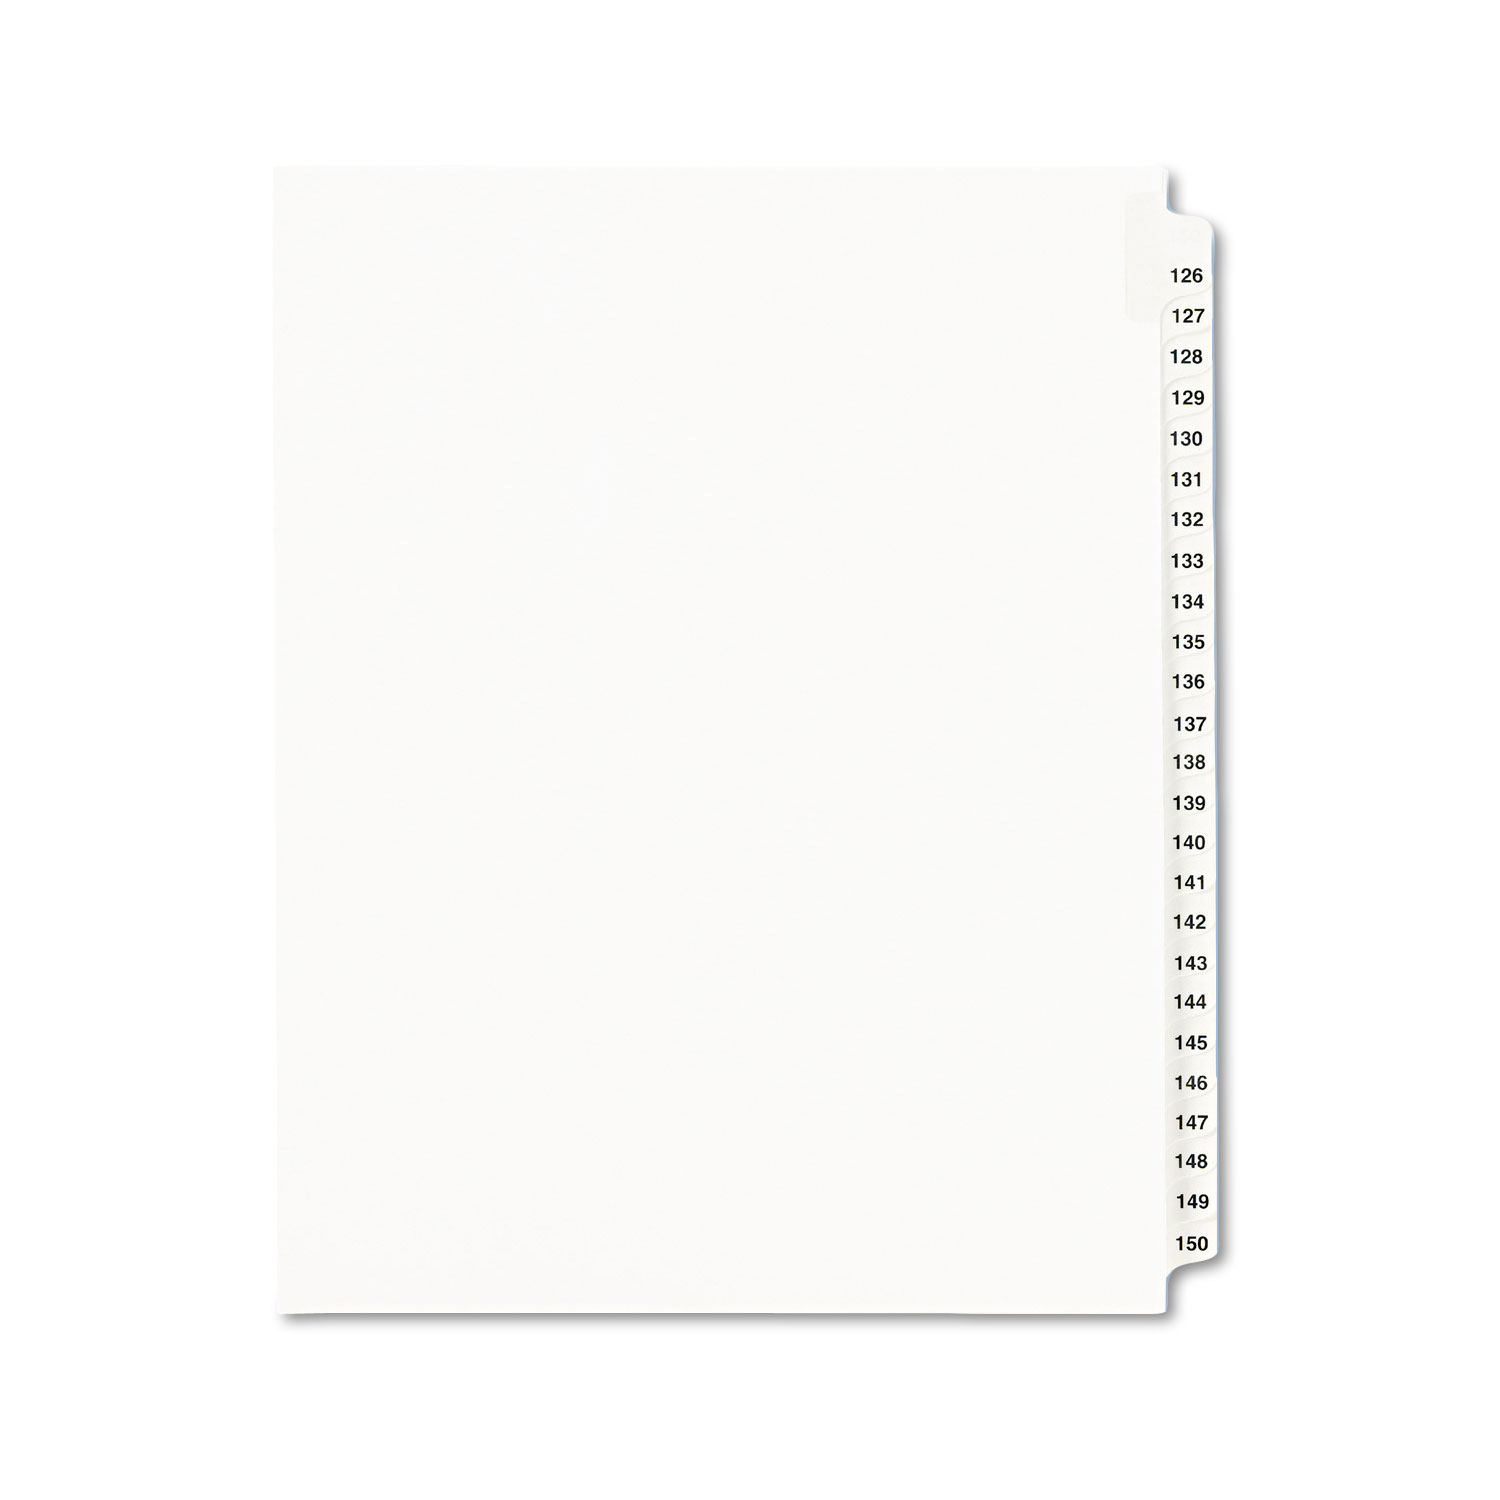  Avery 01335 Preprinted Legal Exhibit Side Tab Index Dividers, Avery Style, 25-Tab, 126 to 150, 11 x 8.5, White, 1 Set (AVE01335) 